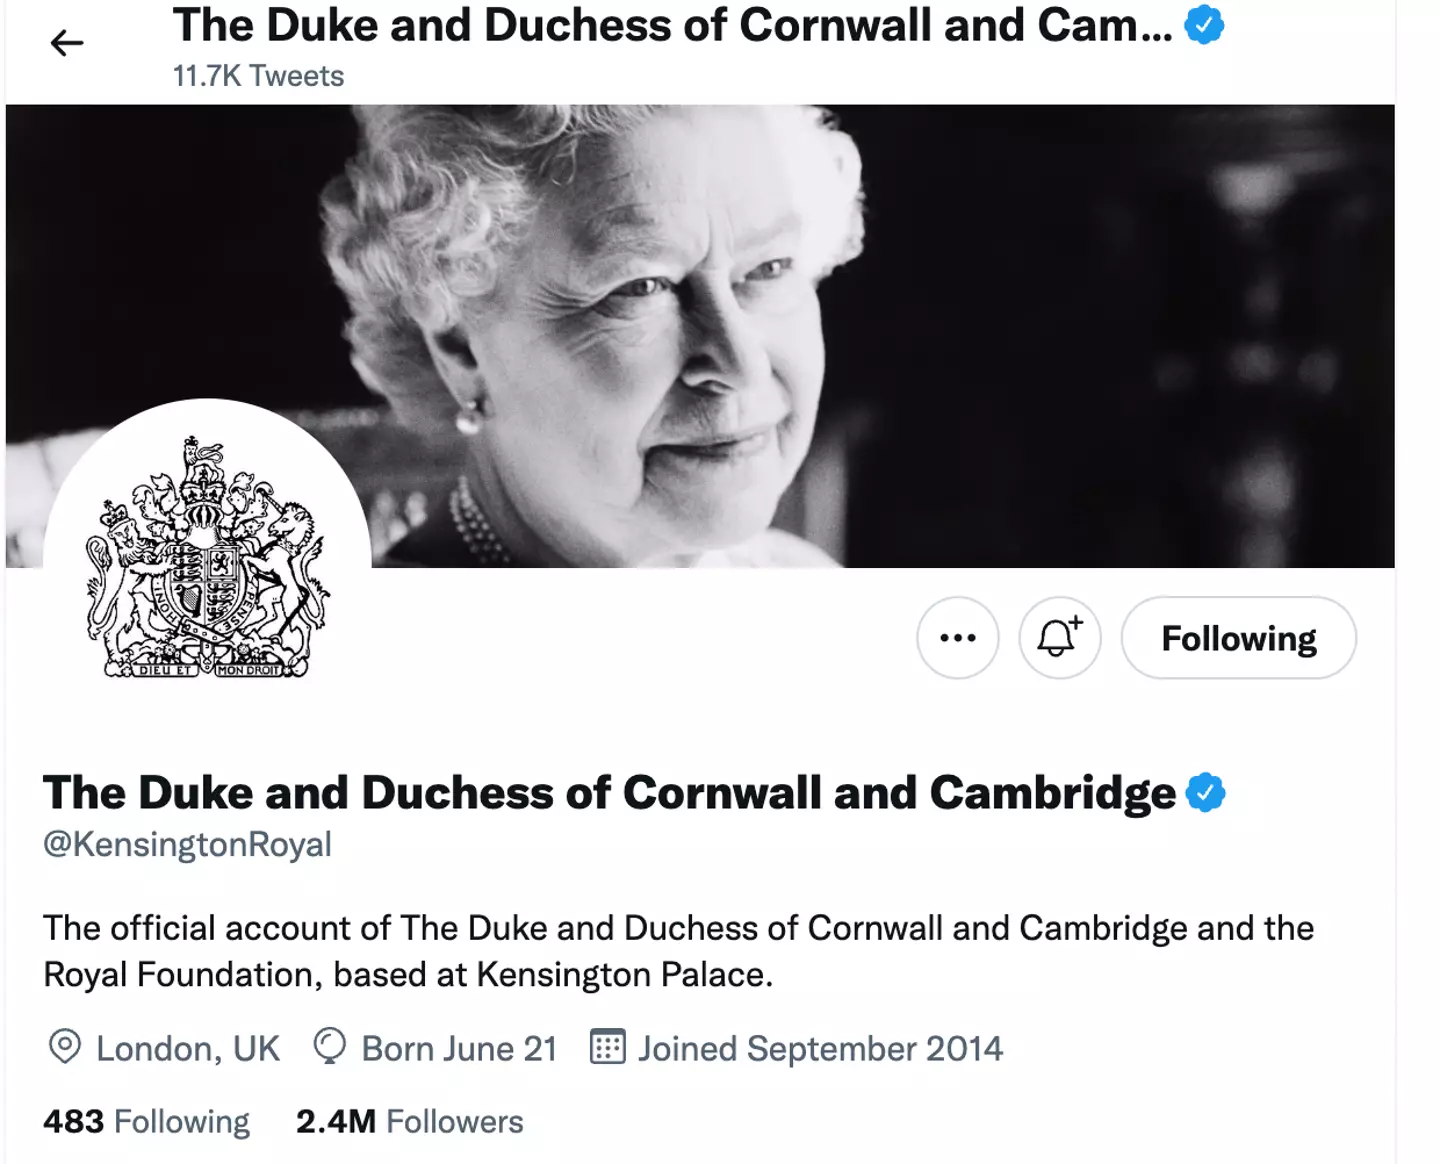 Kensington Palace changed its socials to reflect the title change.